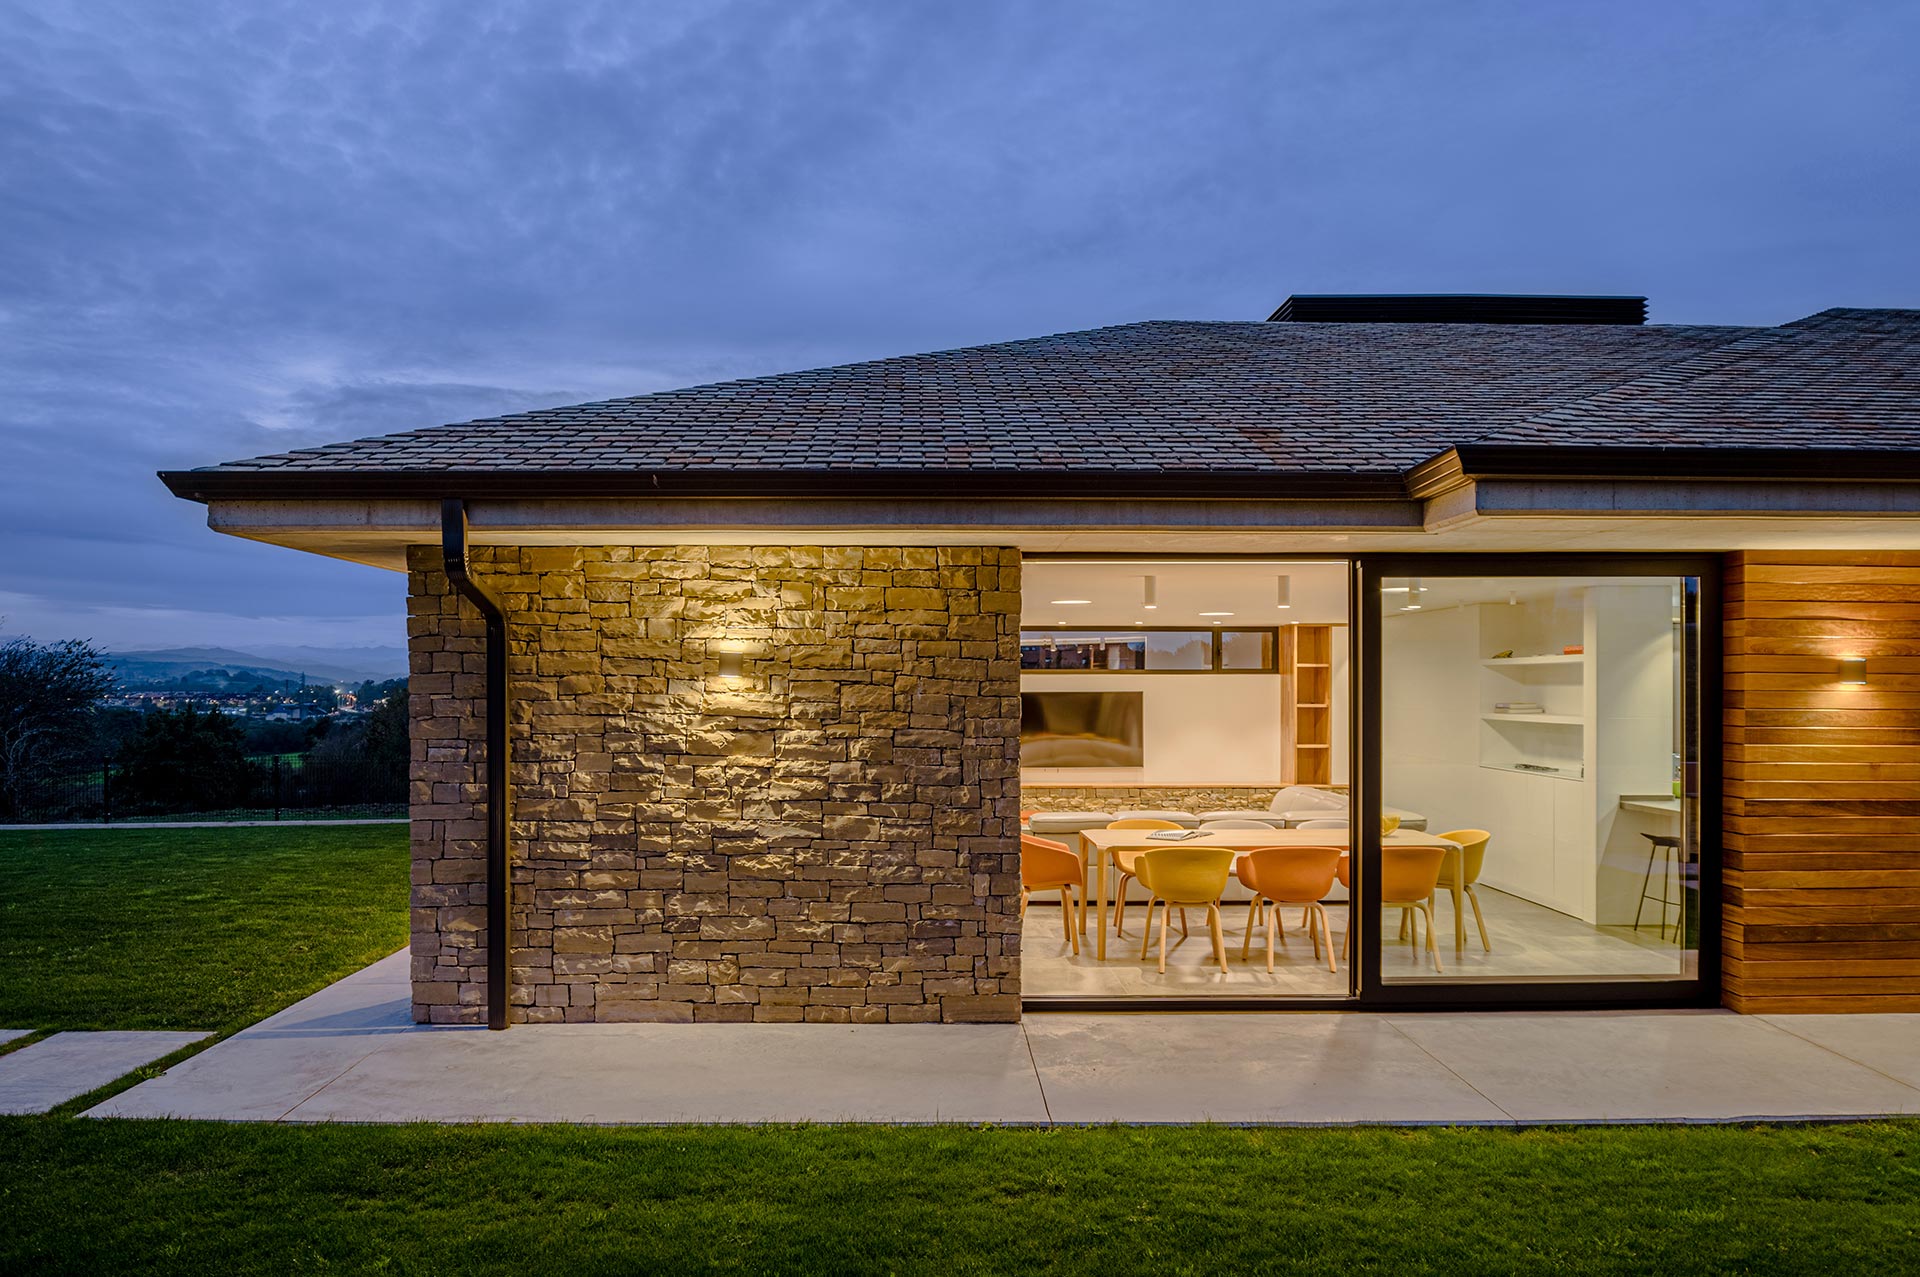 Modern house made of stone, wood, slate, and glass designed by Moah Architects in Pontejos.